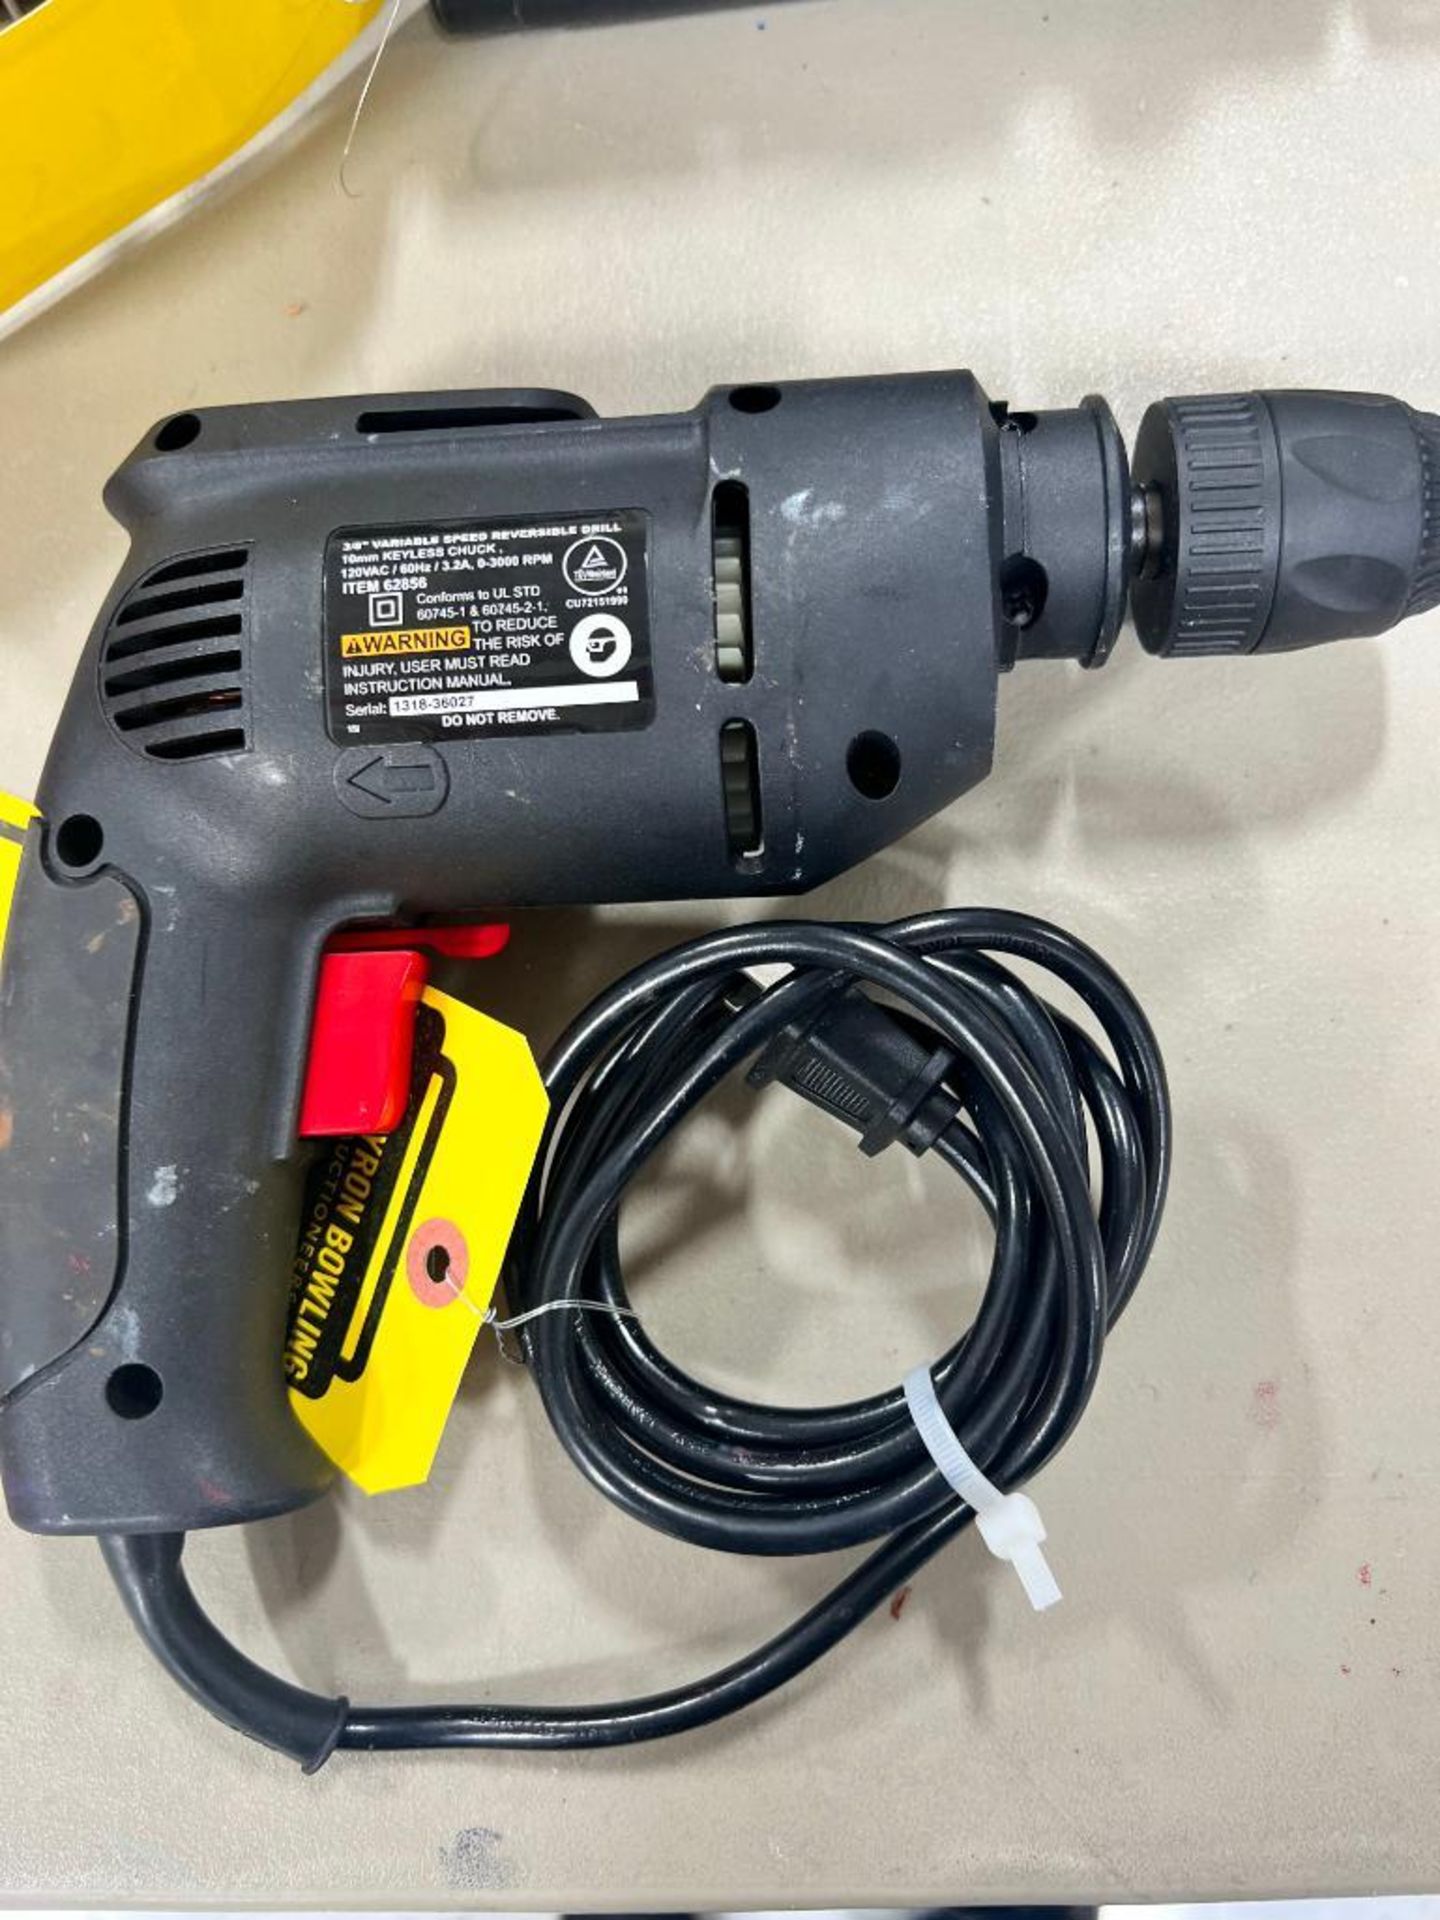 Drill Master Electric Reversible Drill, 3/8", Variable Speed - Image 2 of 2